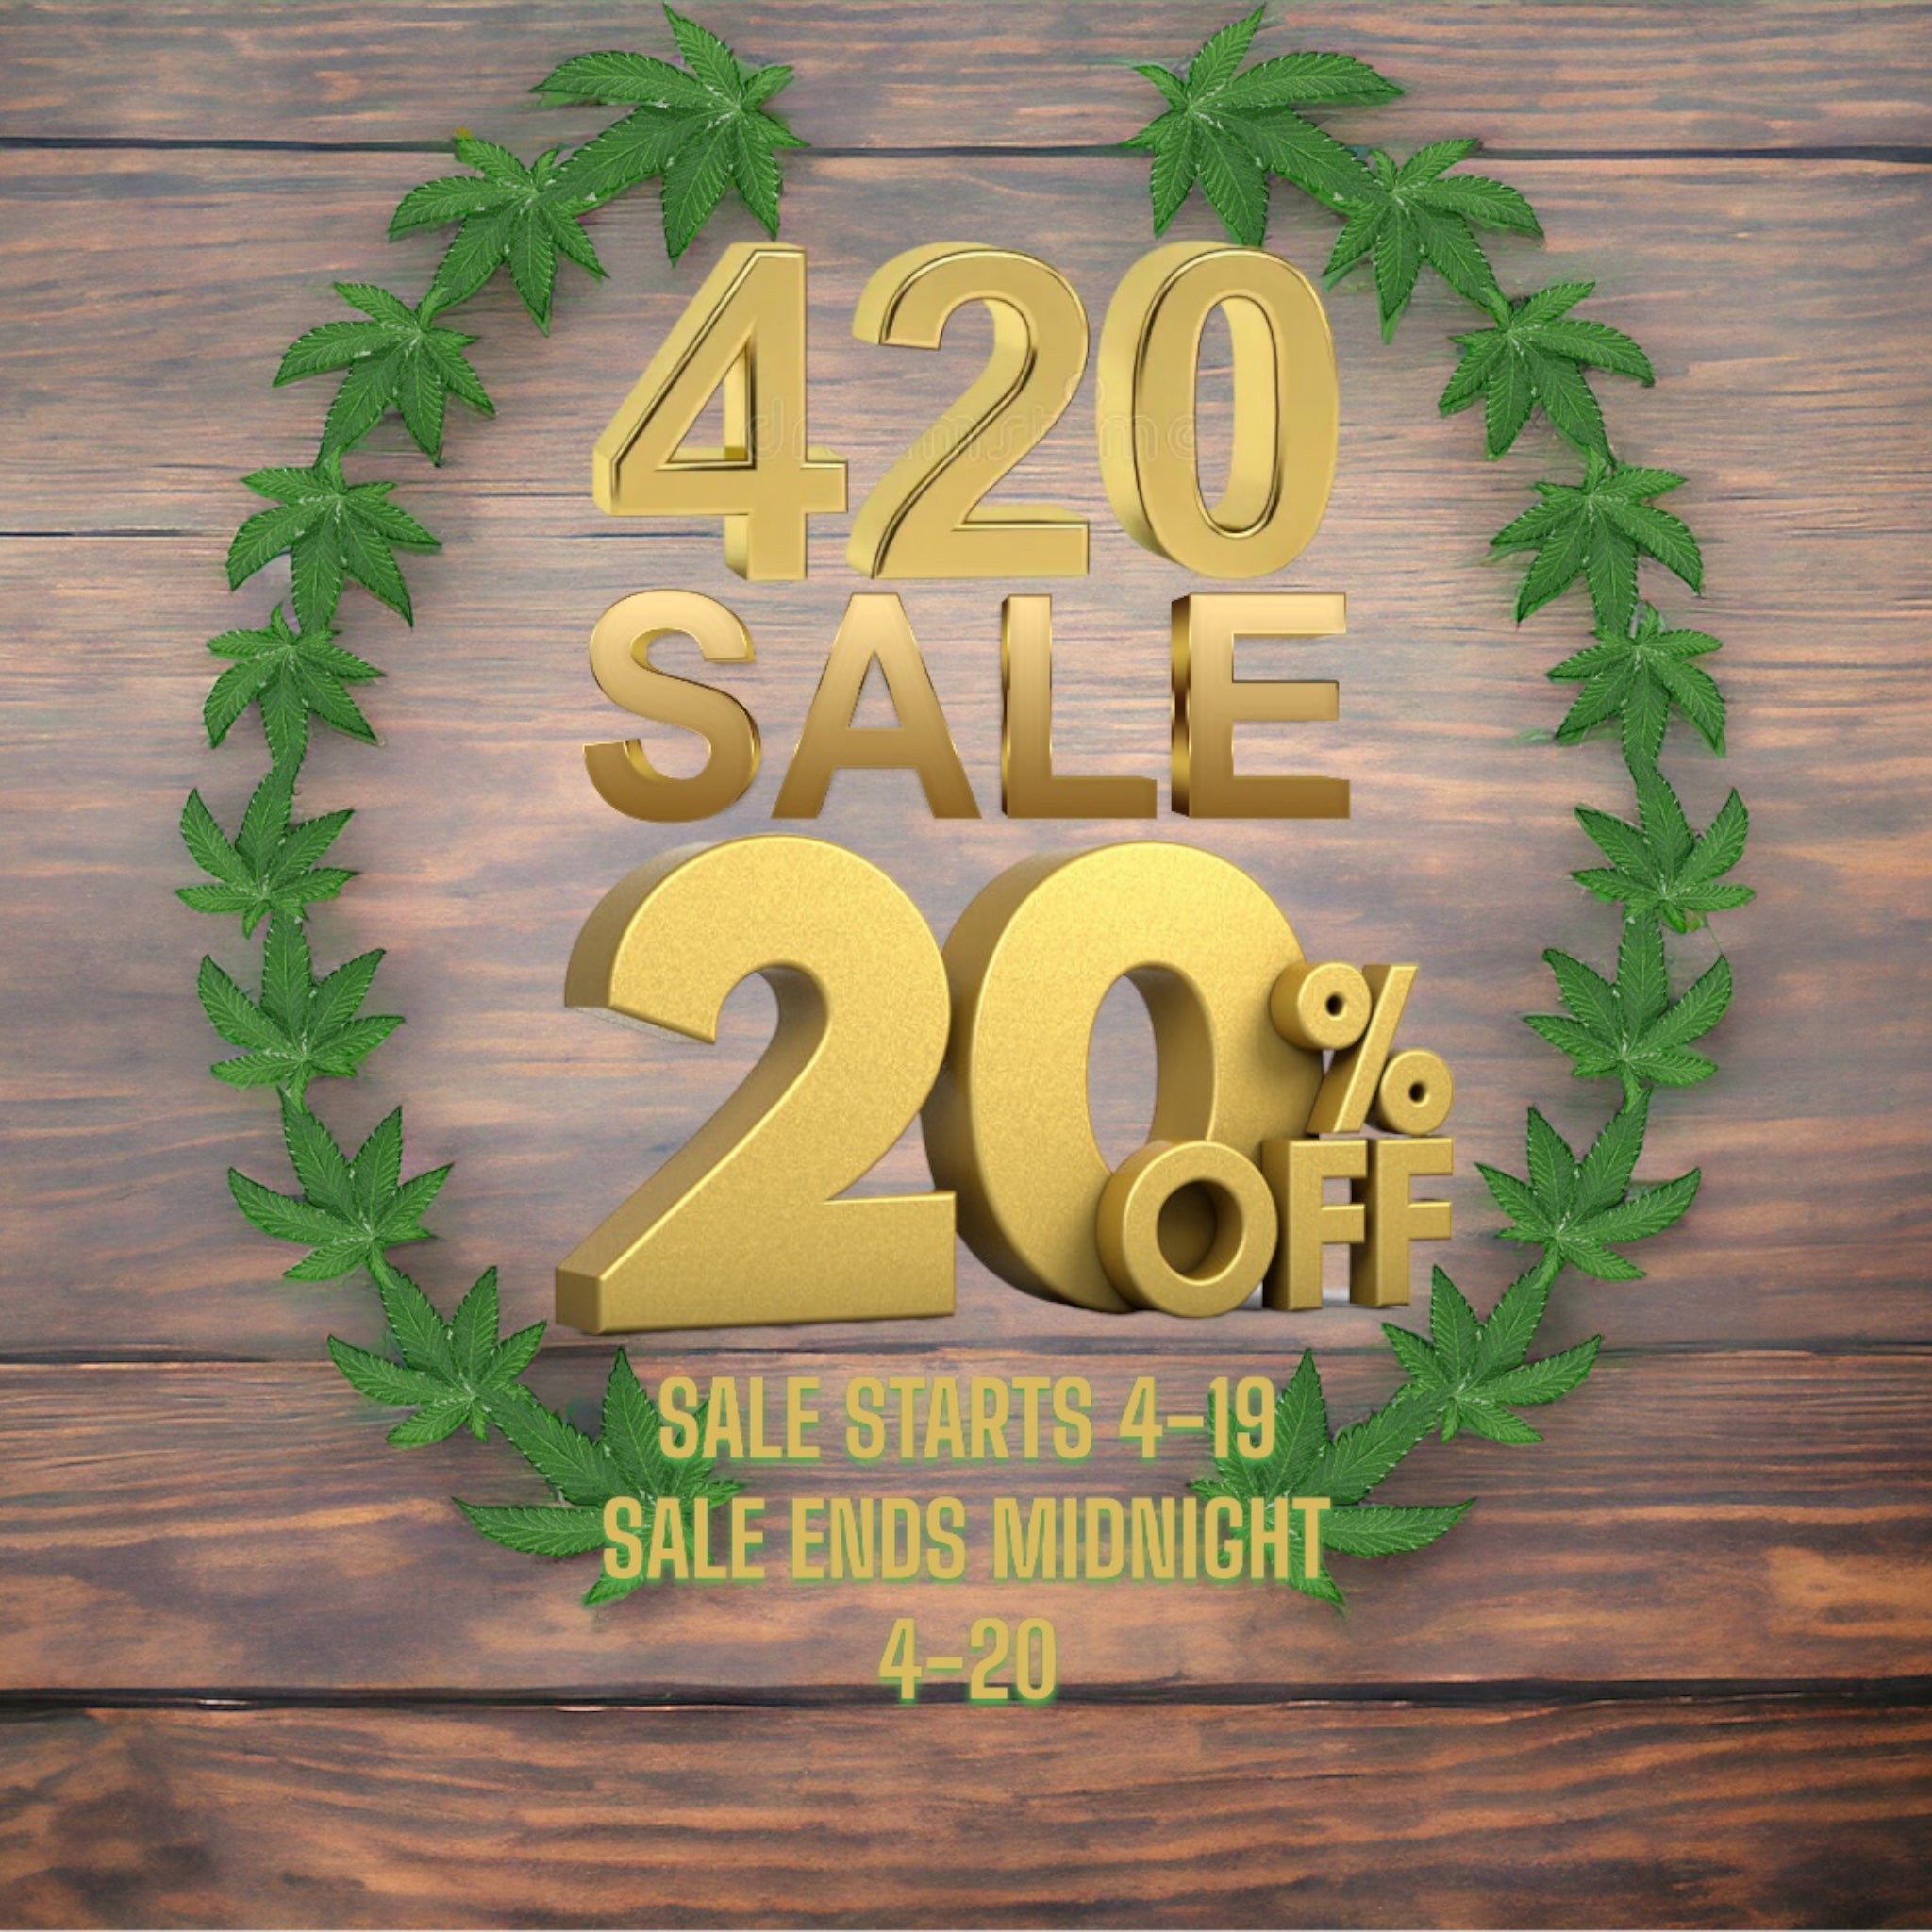 420 sale heady glass bongs and dab rigs